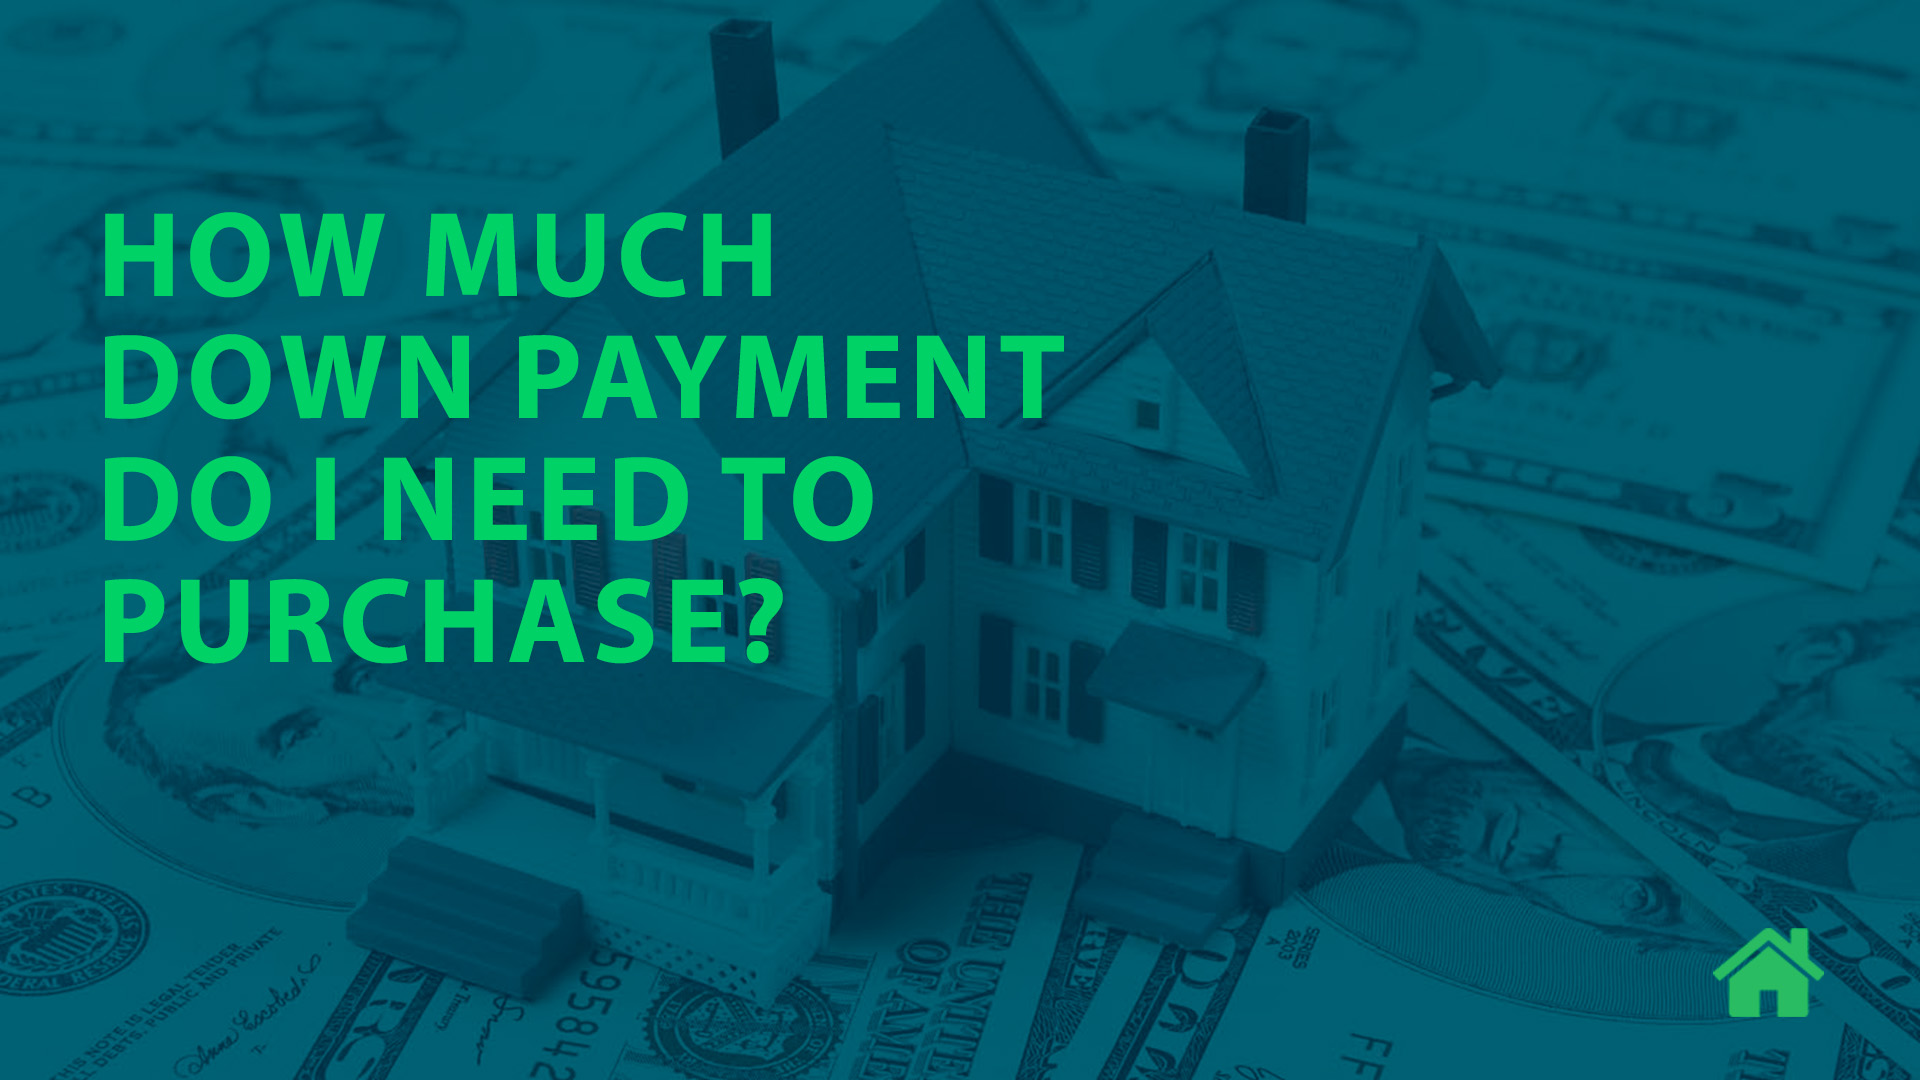 How much down payment do I need to purchase